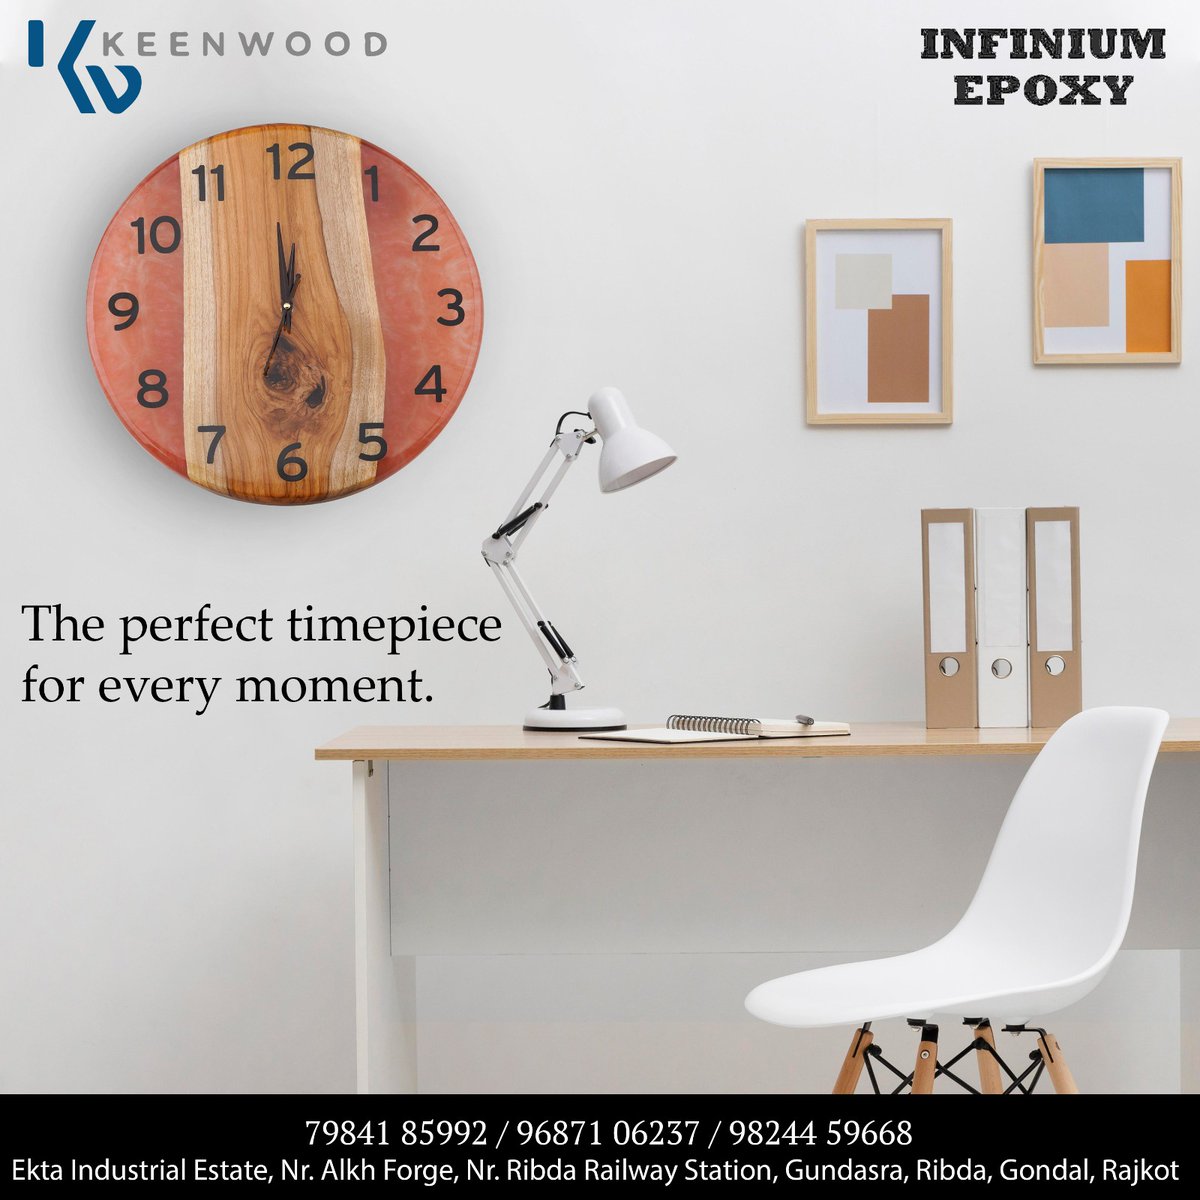 Now decorate every corner of your home with our Amazing Wall Clock 
.
.
.
#infiniumepoxy #infinium #furniture #resinartdesign #resinartsupplies #wallclockdesign #wallclockvintage #resinwallclock #diningtabledesign #diningtablestyling #homedecordiy #homedecorgoals #homedecorstyle